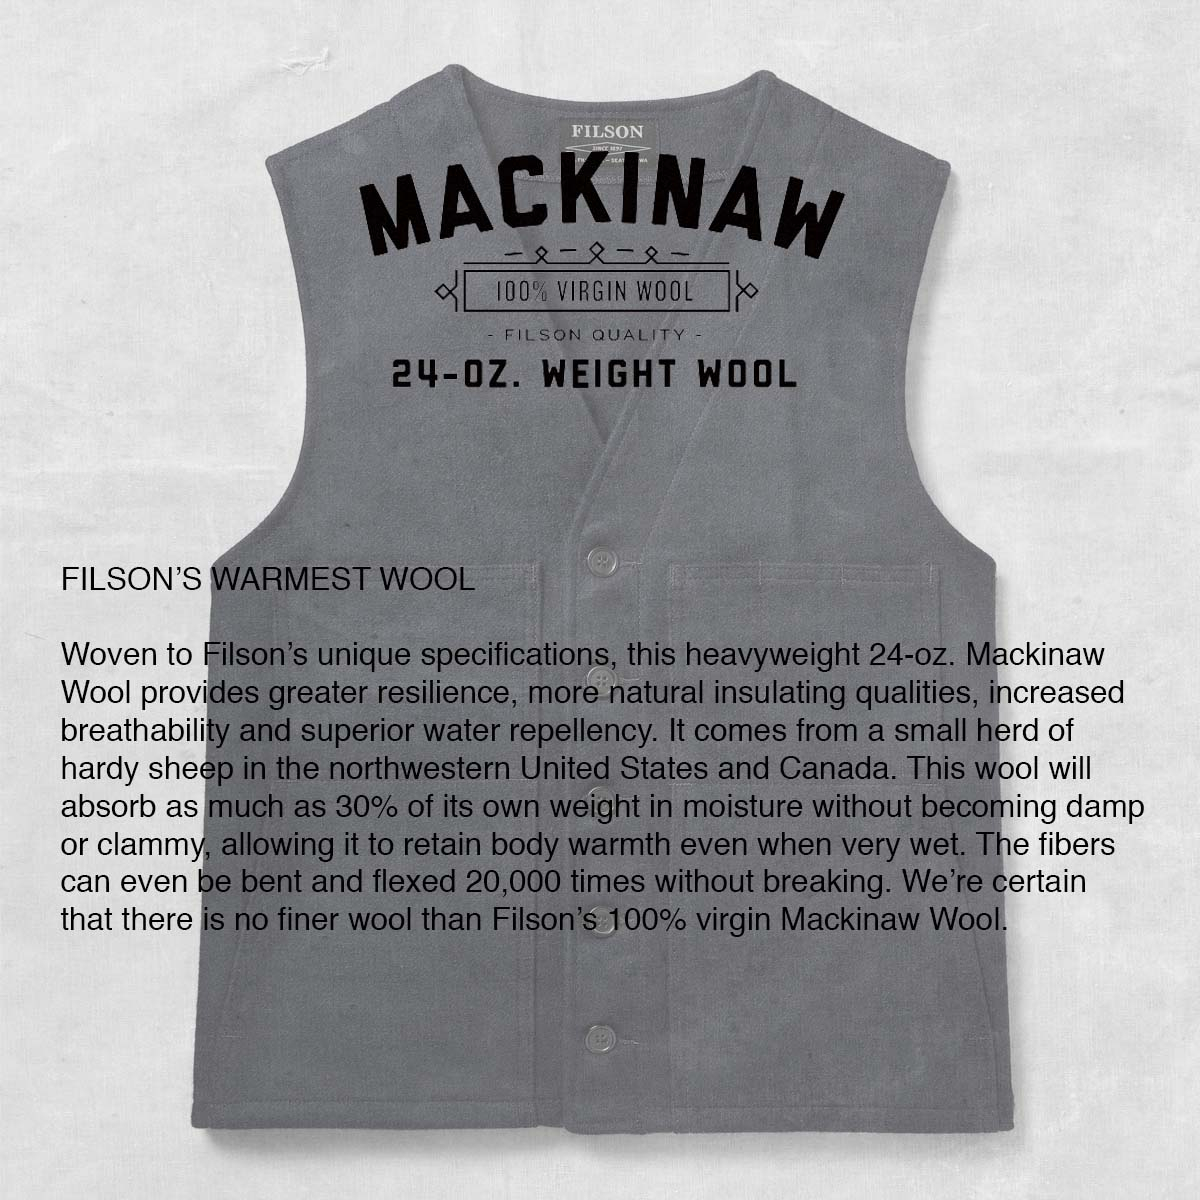 Filson Mackinaw Wool Vest, Made of 100% virgin Mackinaw Wool for comfort, natural water-repellency and insulating warmth in any weather conditions.